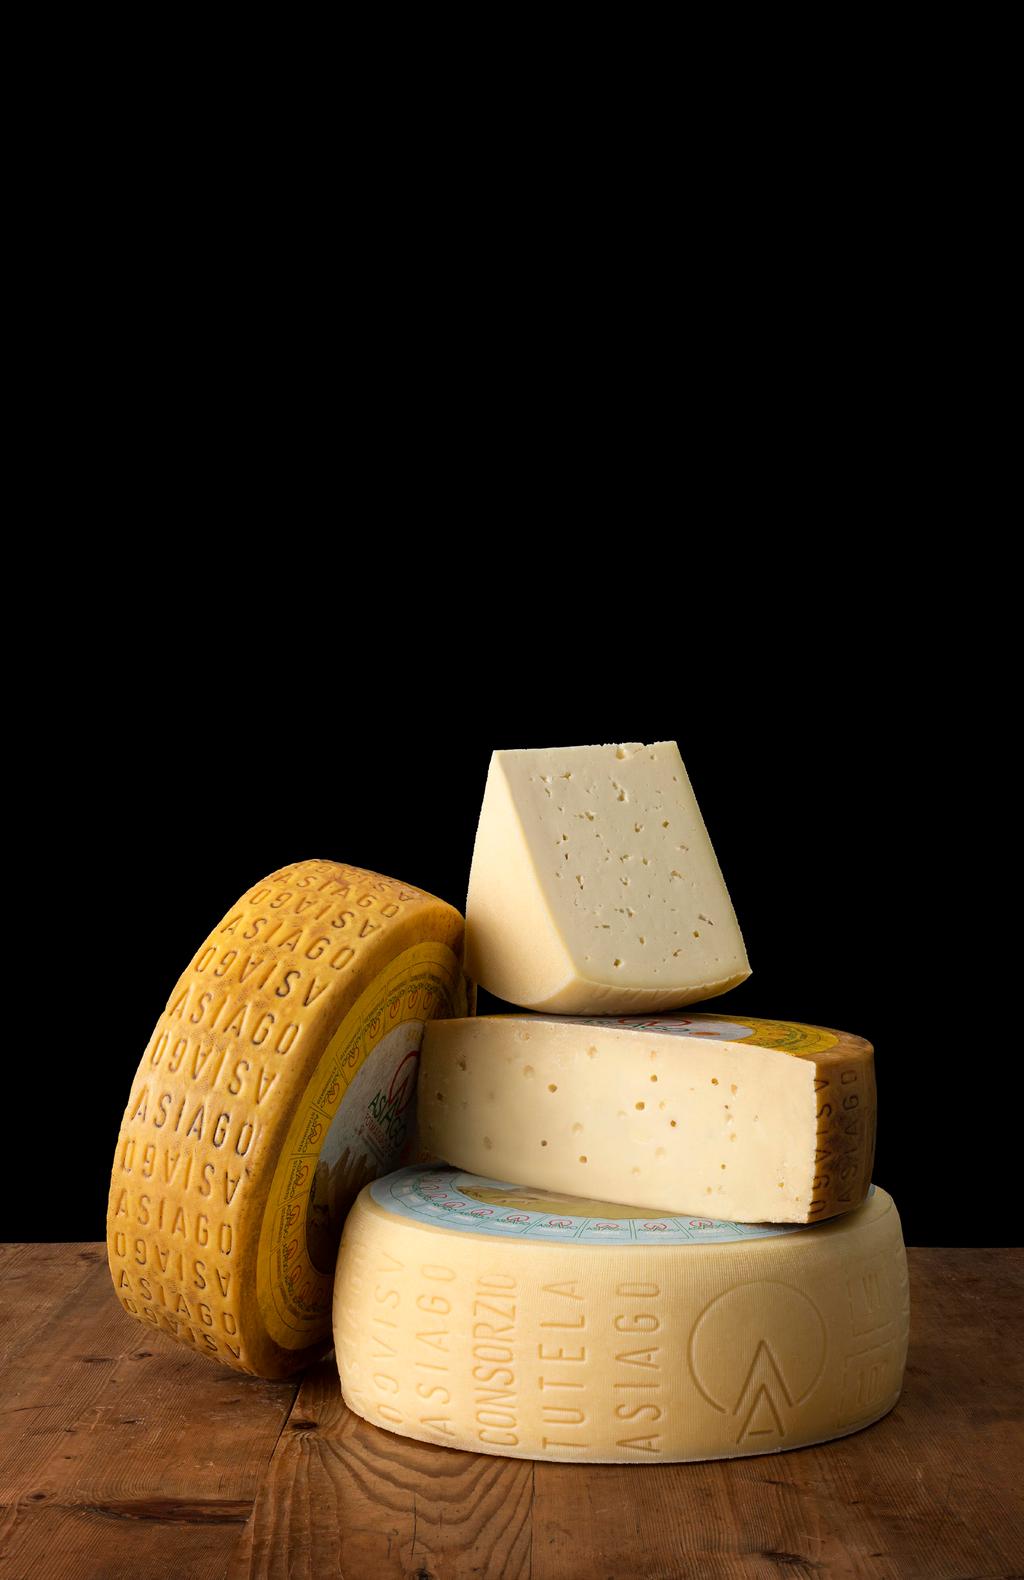 Fresh Asiago Flavor: Tastes of fresh milk and melts easily on your tongue to reveal sweet buttery and slightly tangy notes Pairing: Orange blossom or wild flower honey and spicy jams Wines: